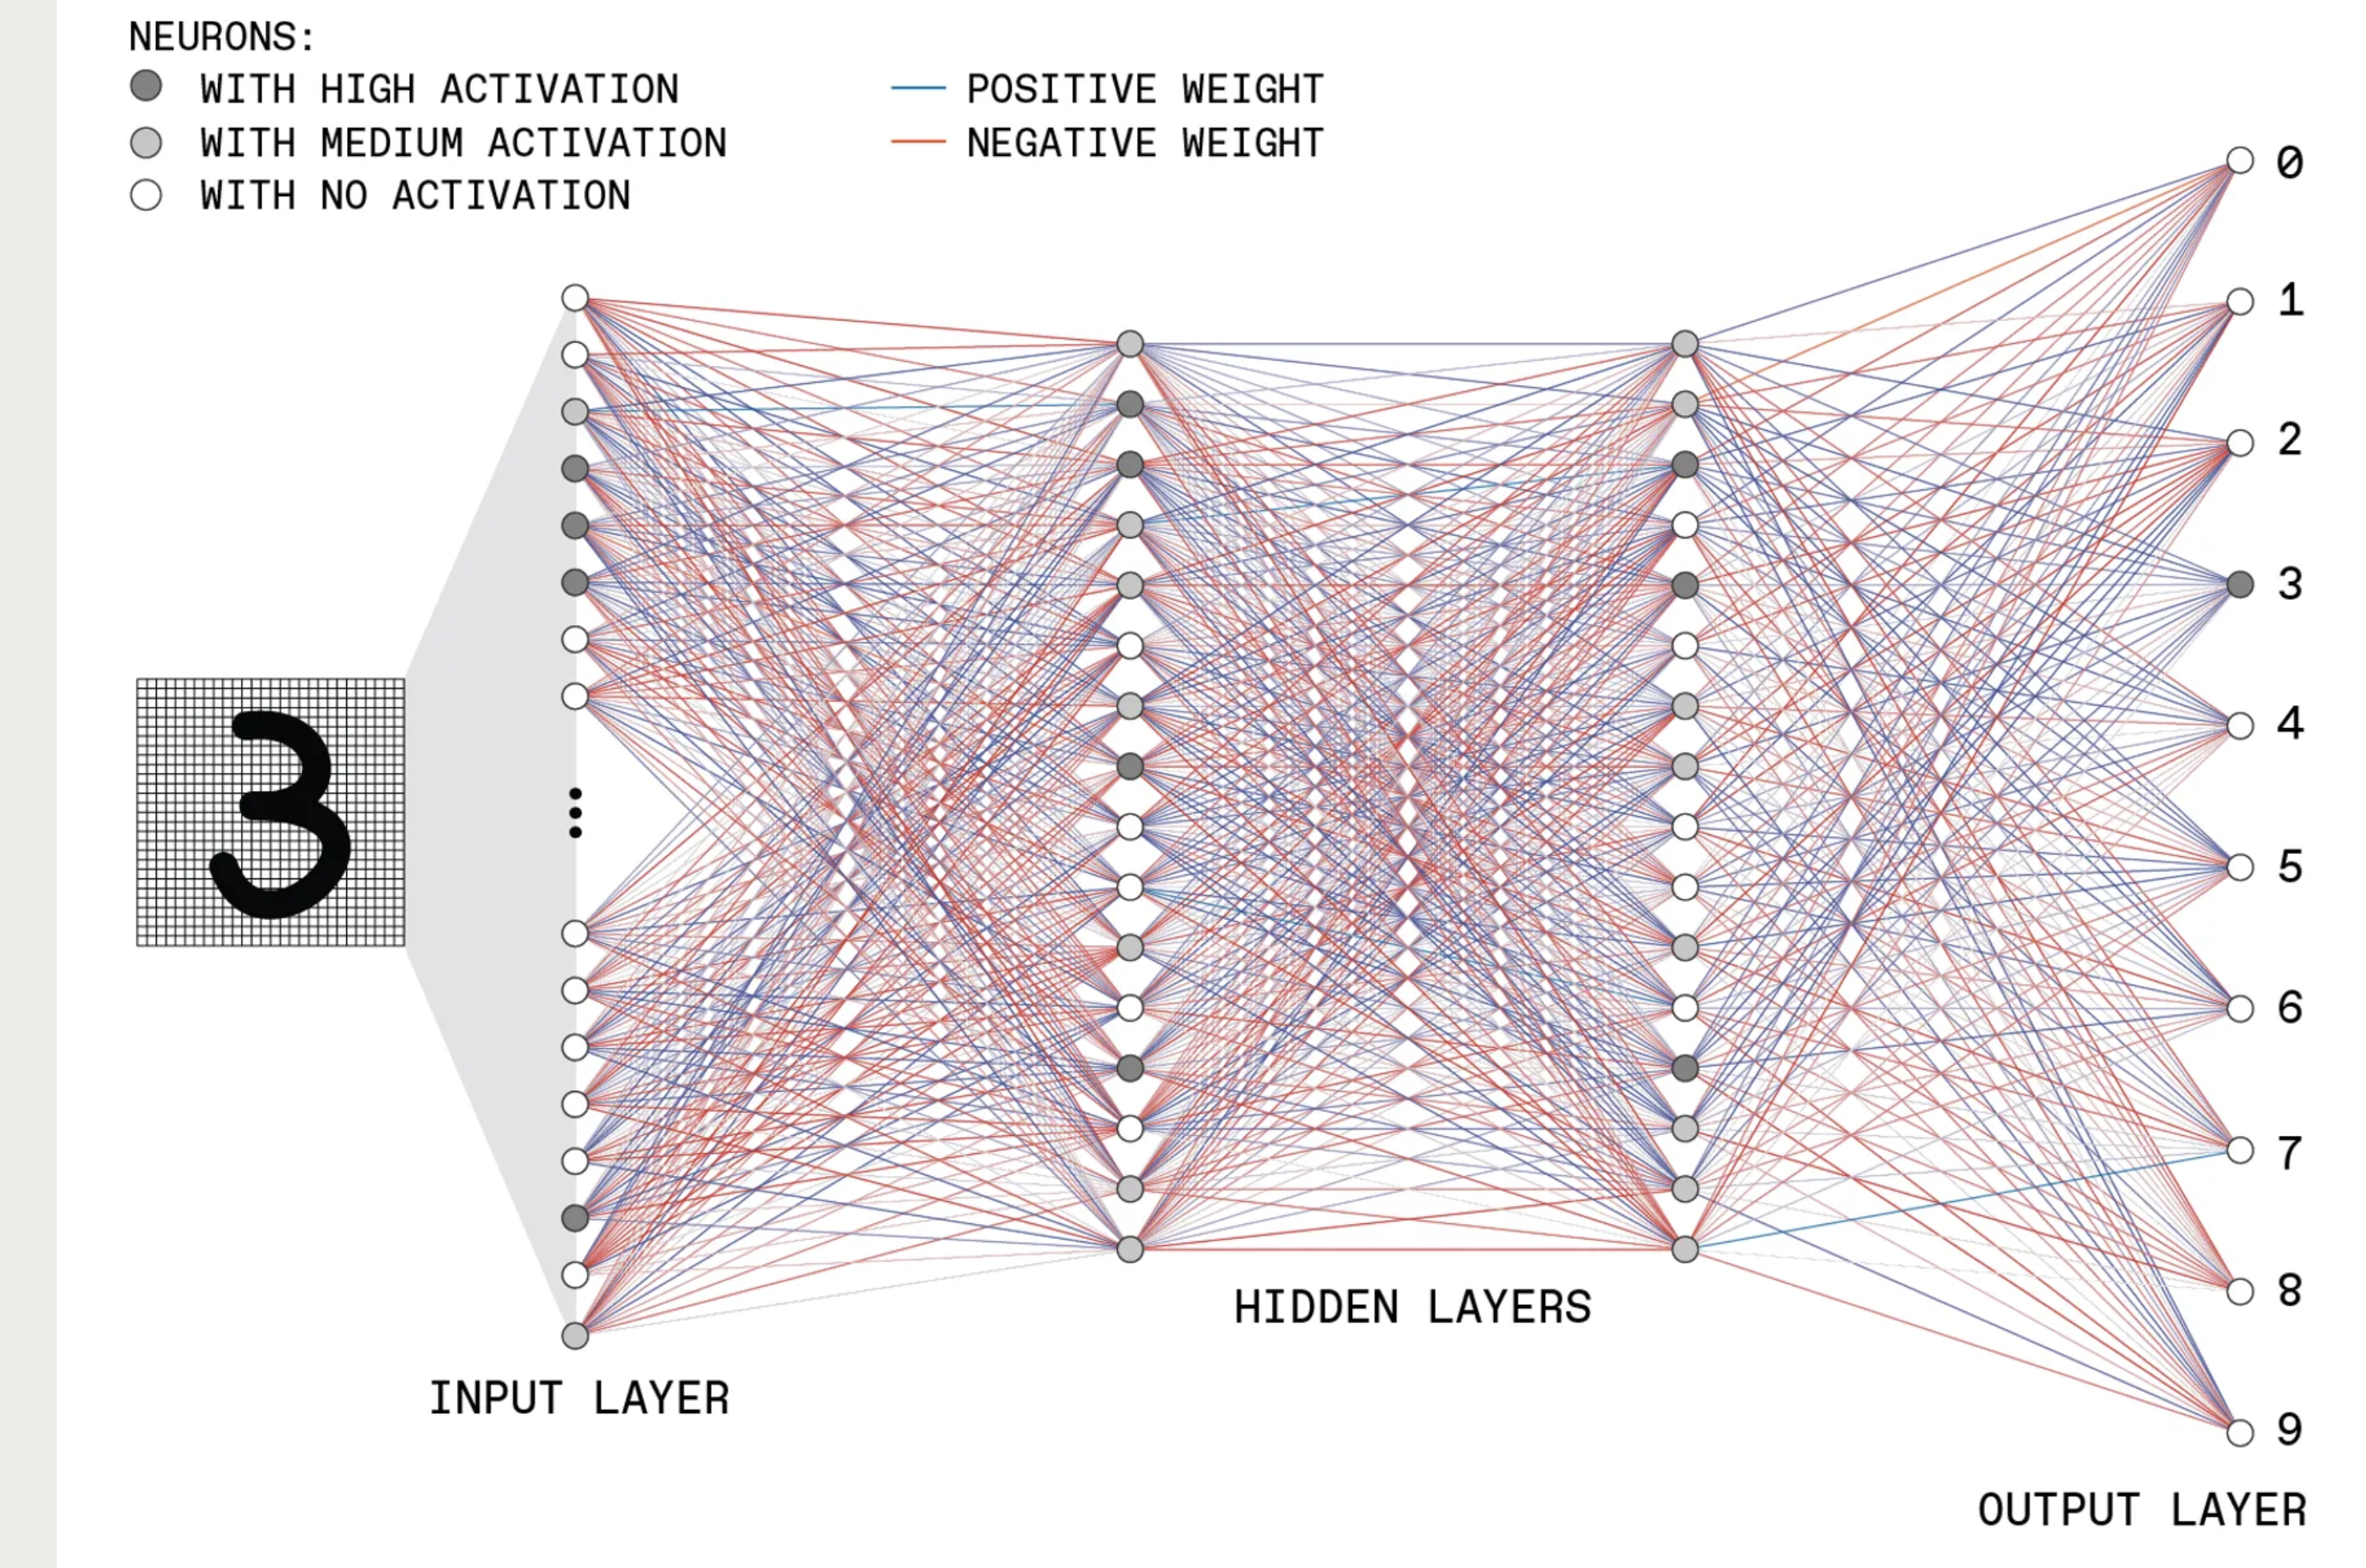 #AI: A graphical explanation of how these neural networks are structured and trained